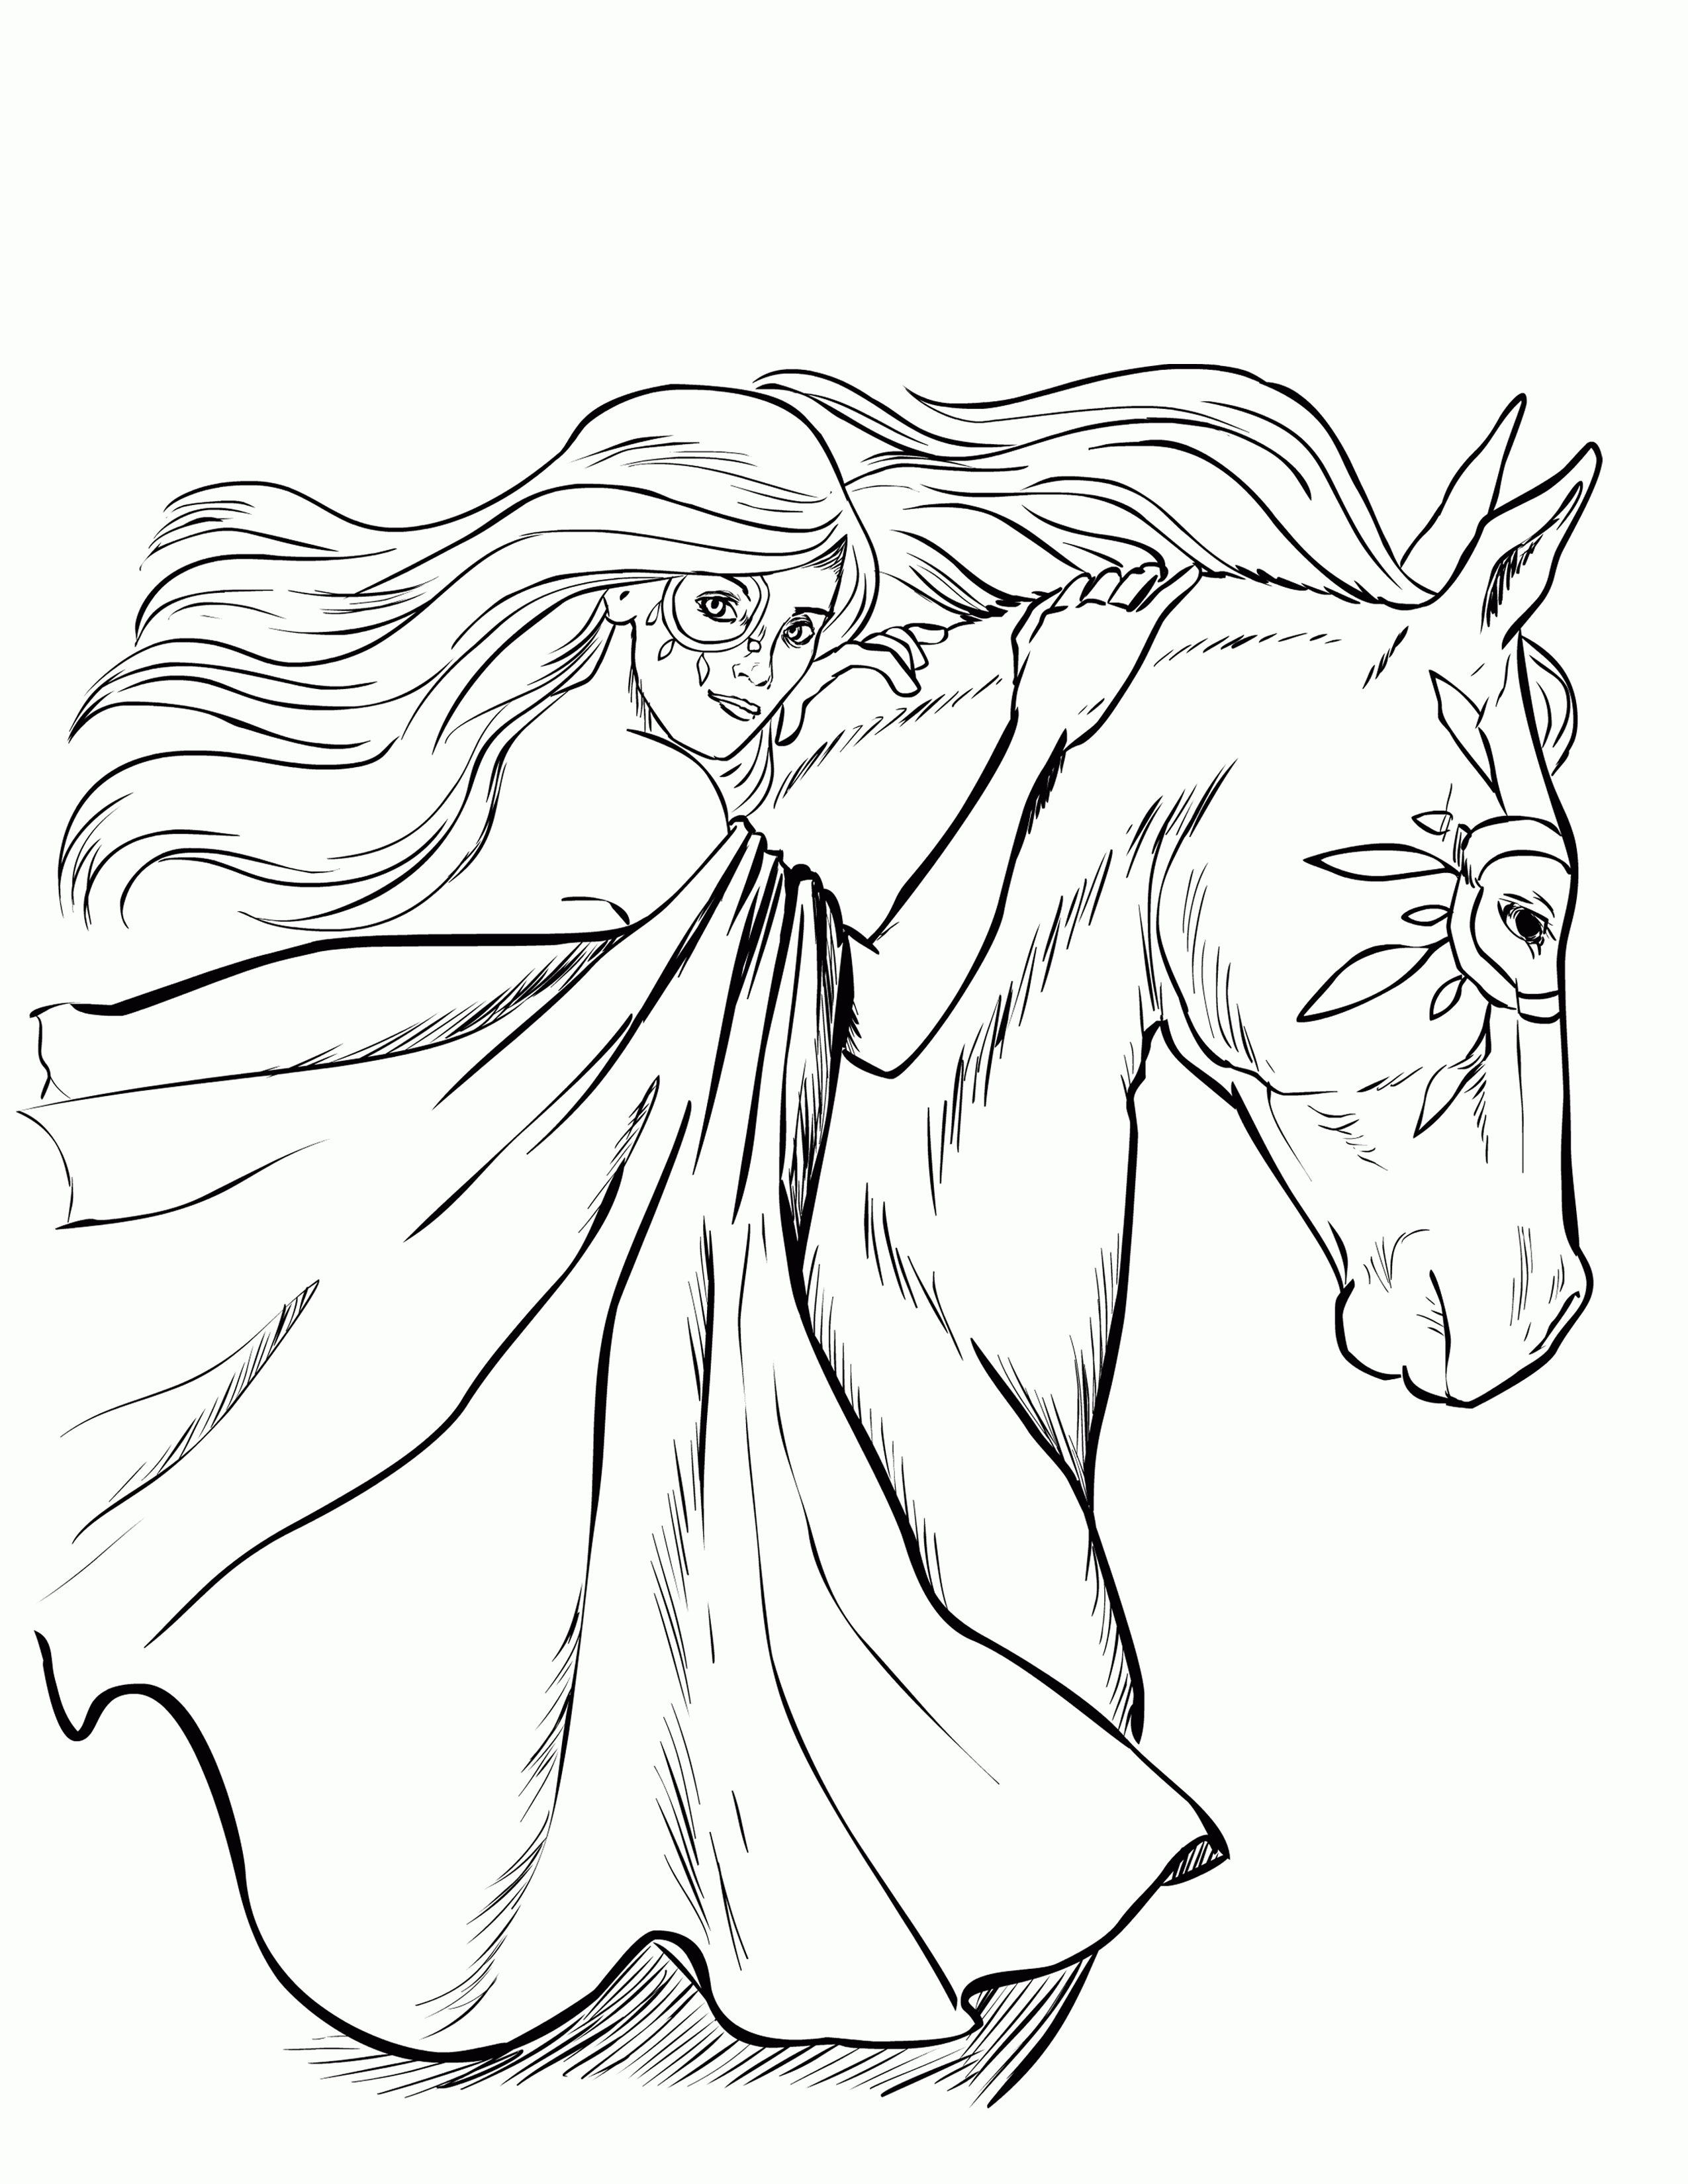 FREE HORSE COLORING PAGES | Selah Works - Artwork and Adult ...